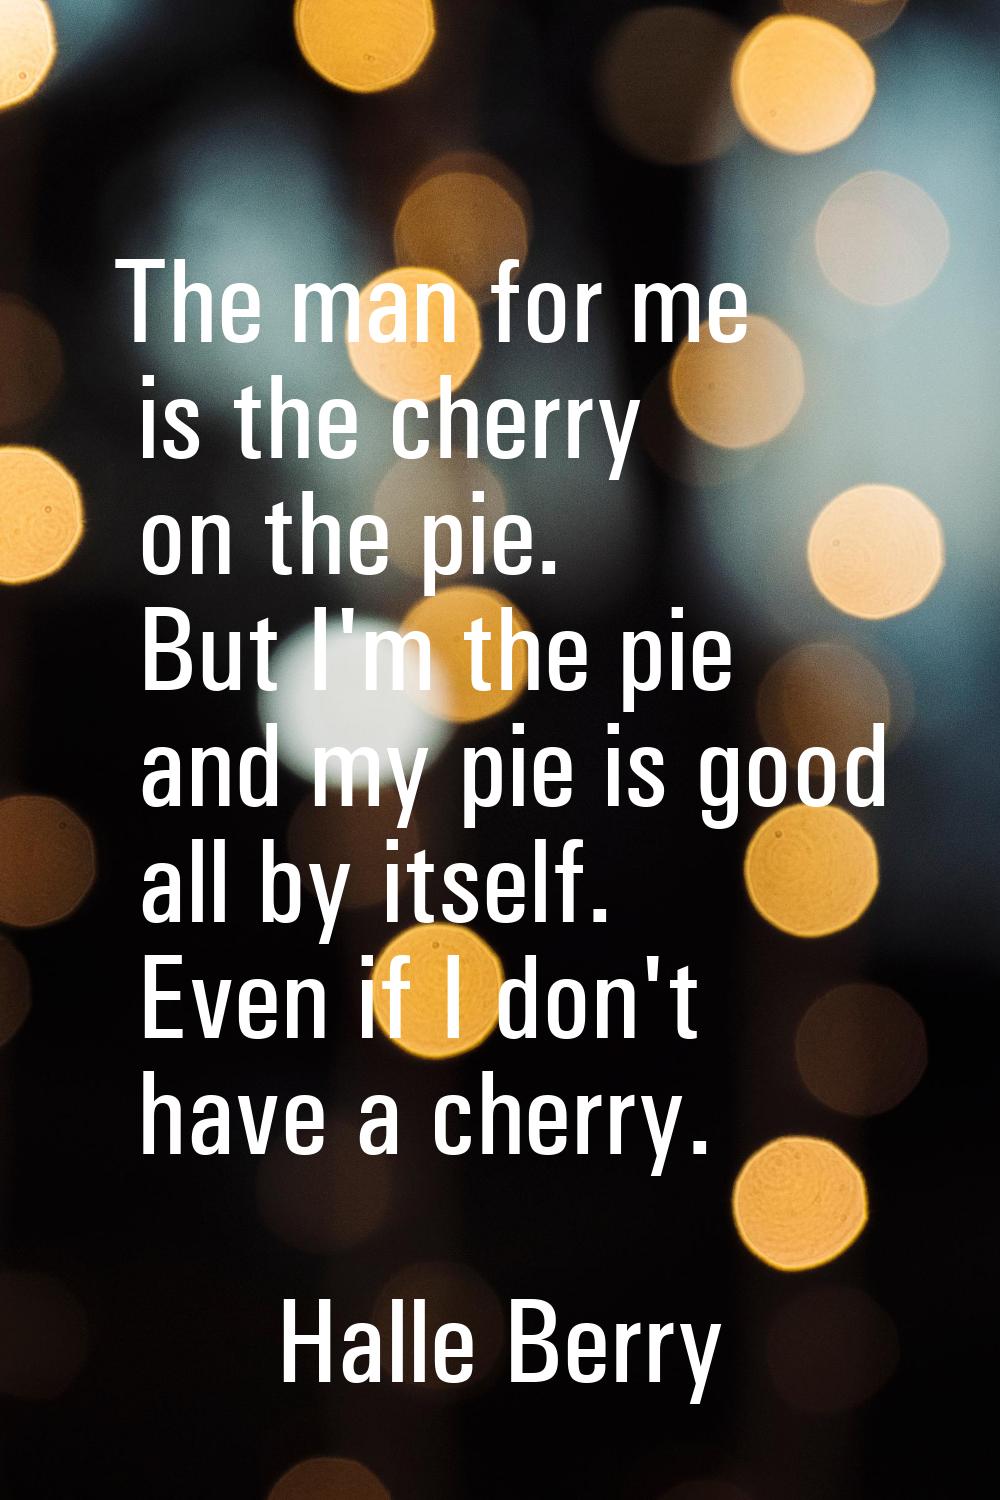 The man for me is the cherry on the pie. But I'm the pie and my pie is good all by itself. Even if 